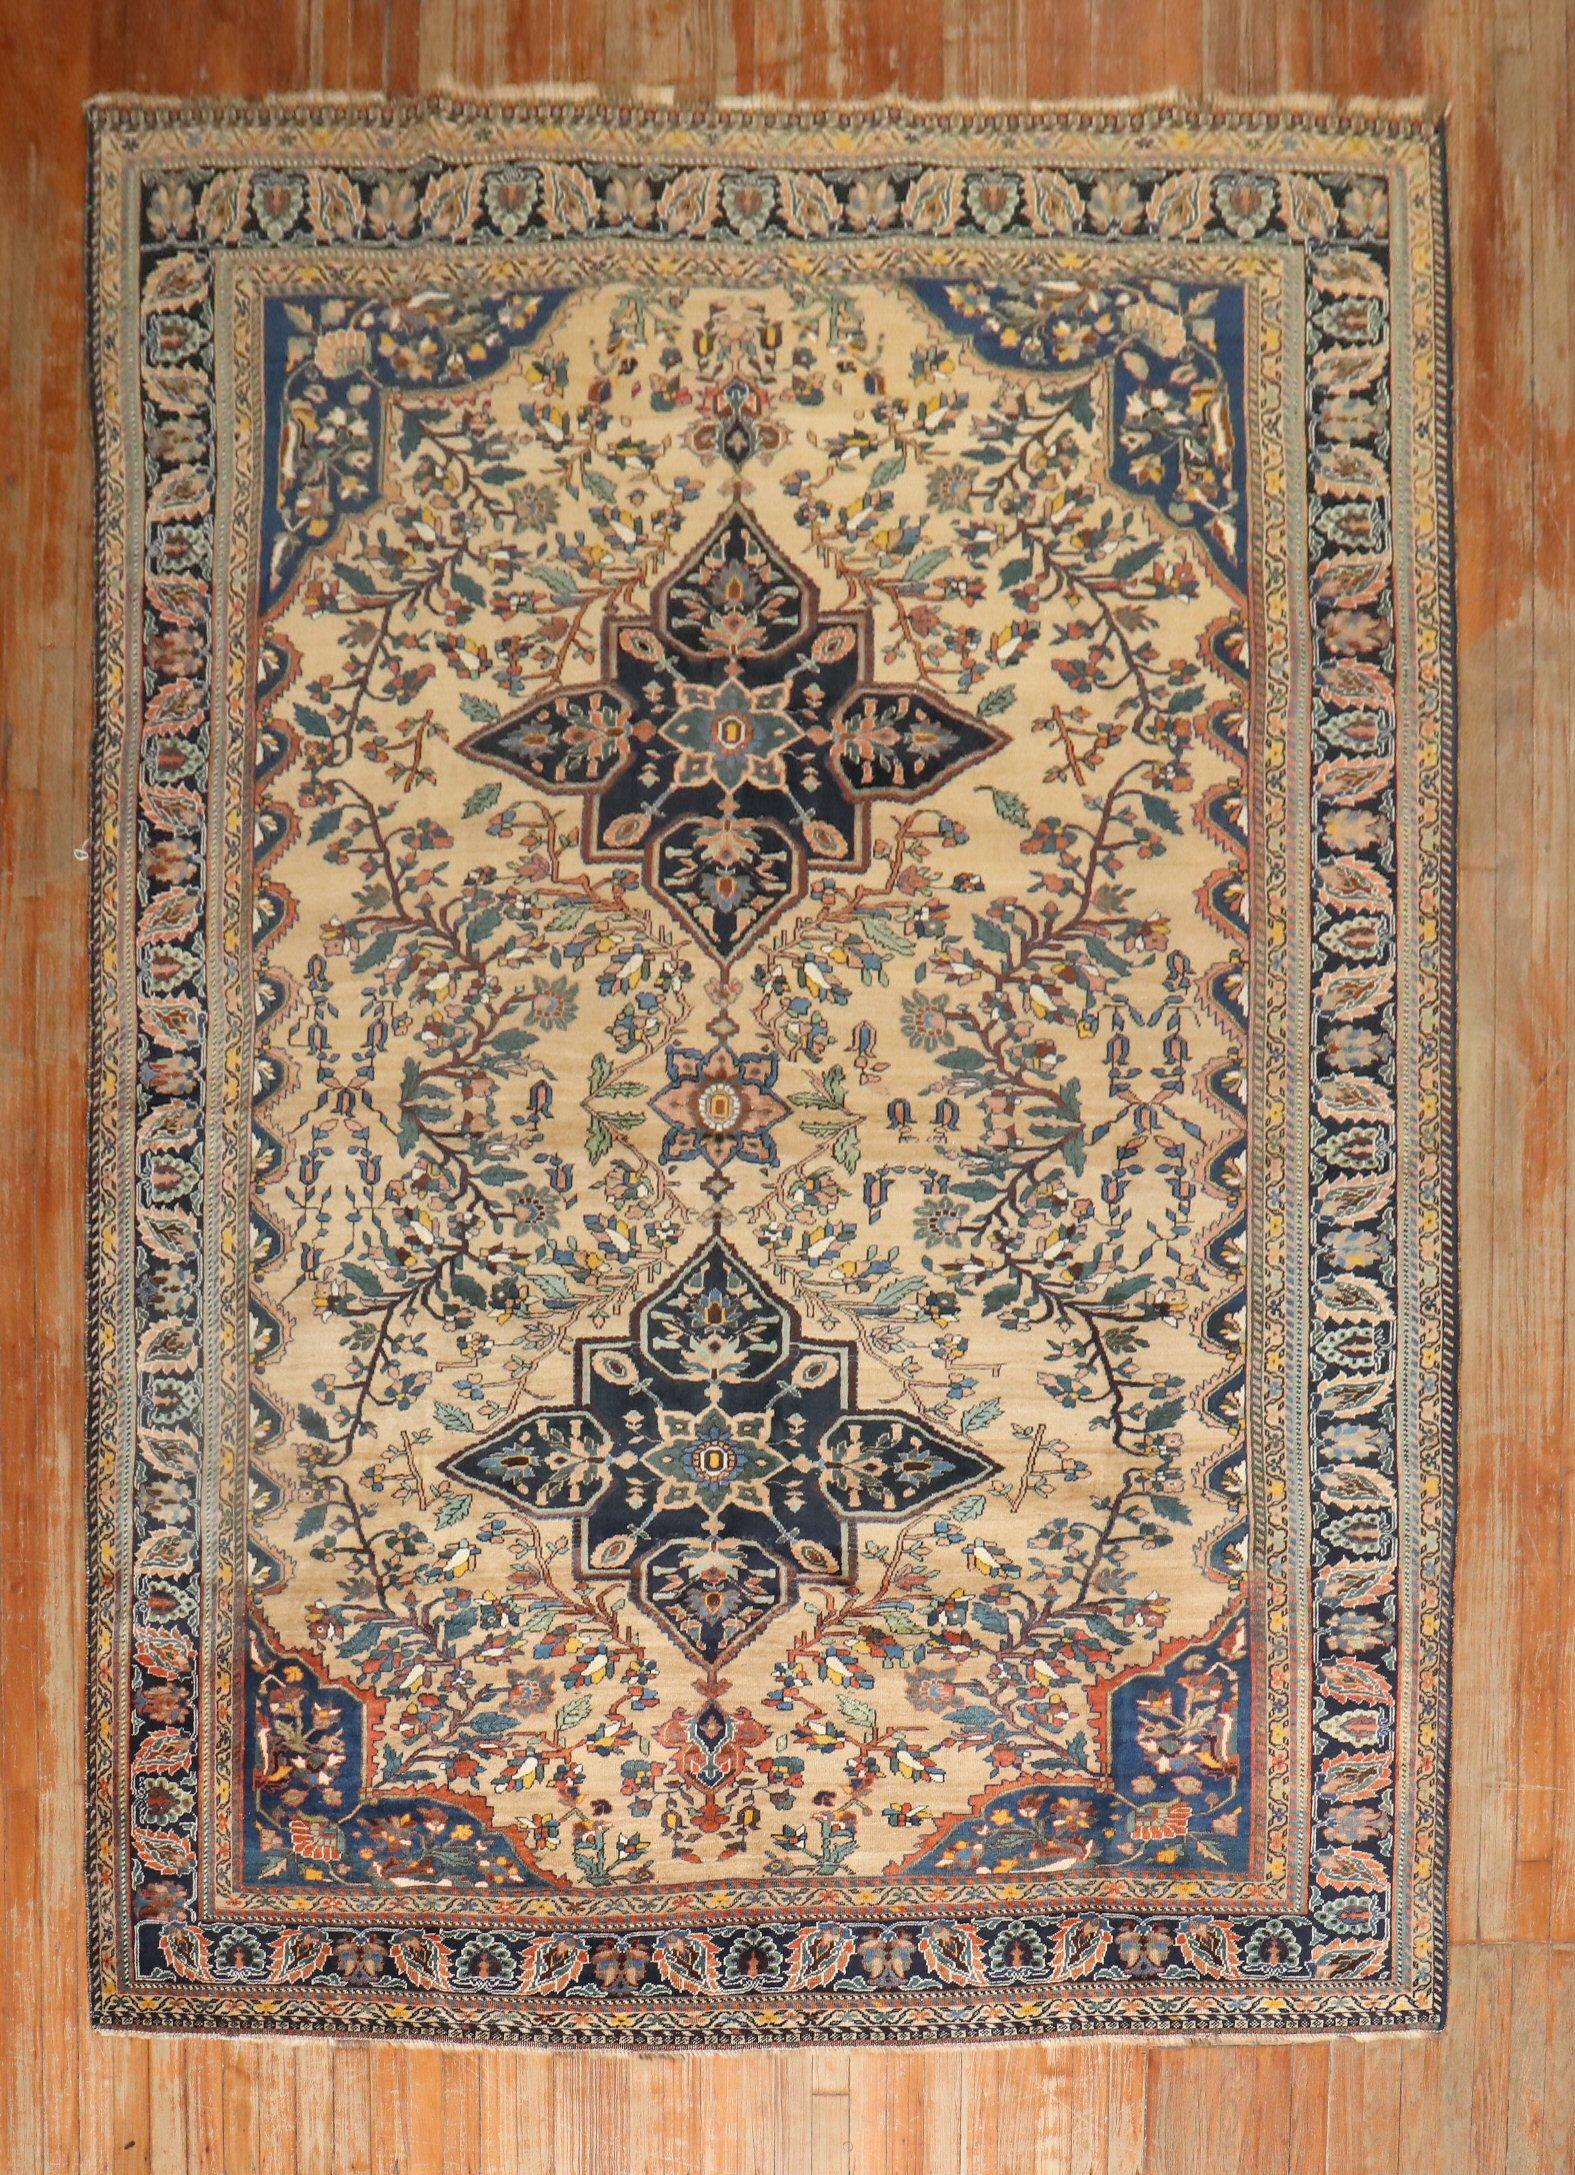 Zabihi Collection Early 20th Century Qashqai Rare Small Room Size Rug For Sale 5